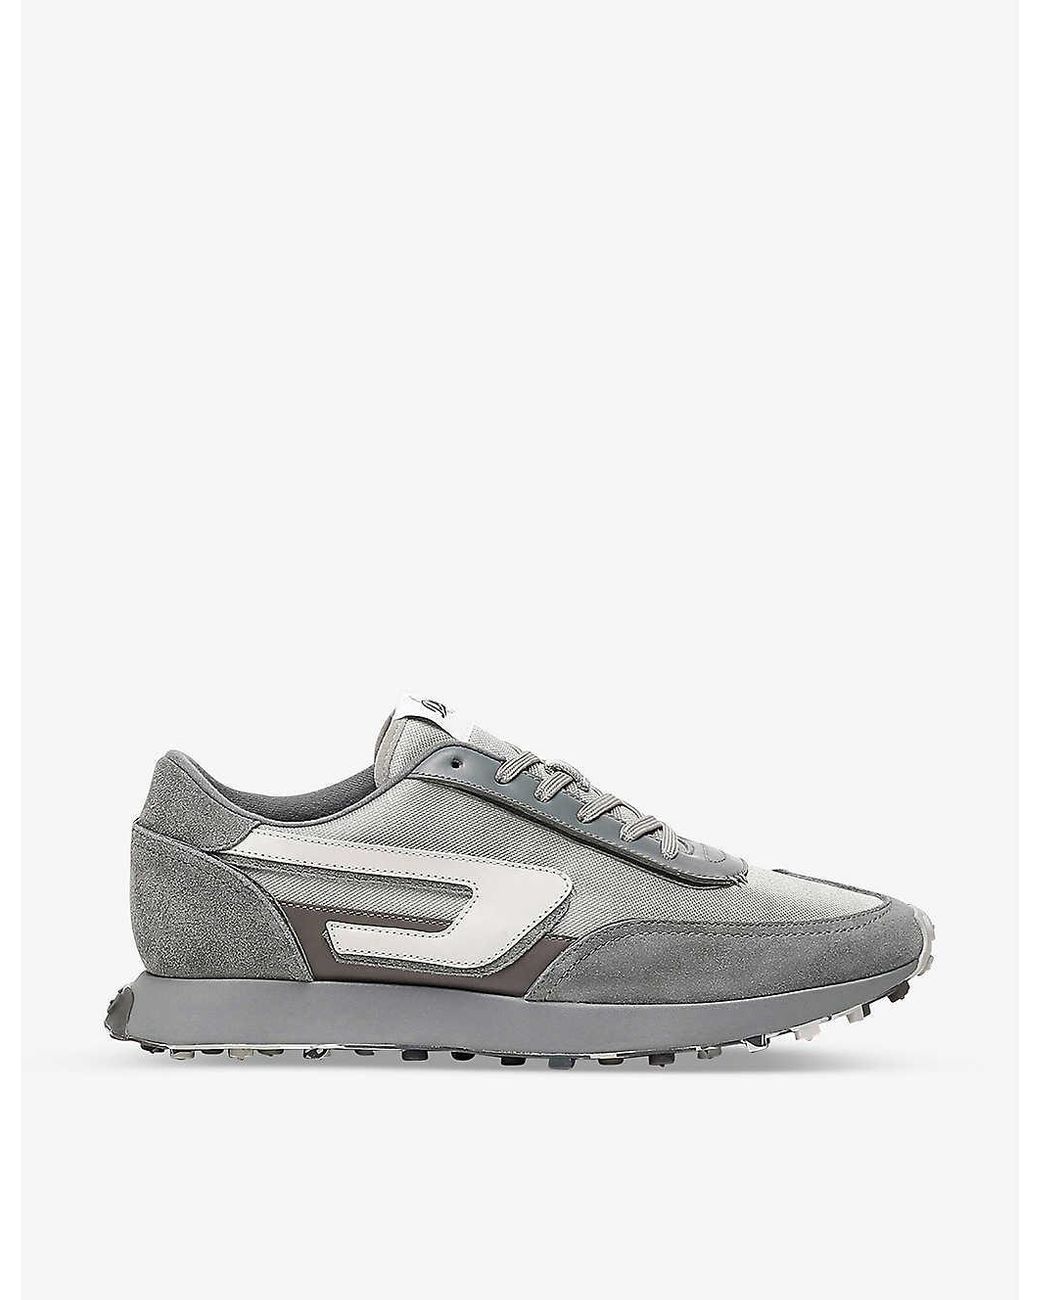 DIESEL S-racer Lc Camo-print Leather-blend Trainers in Gray for Men | Lyst